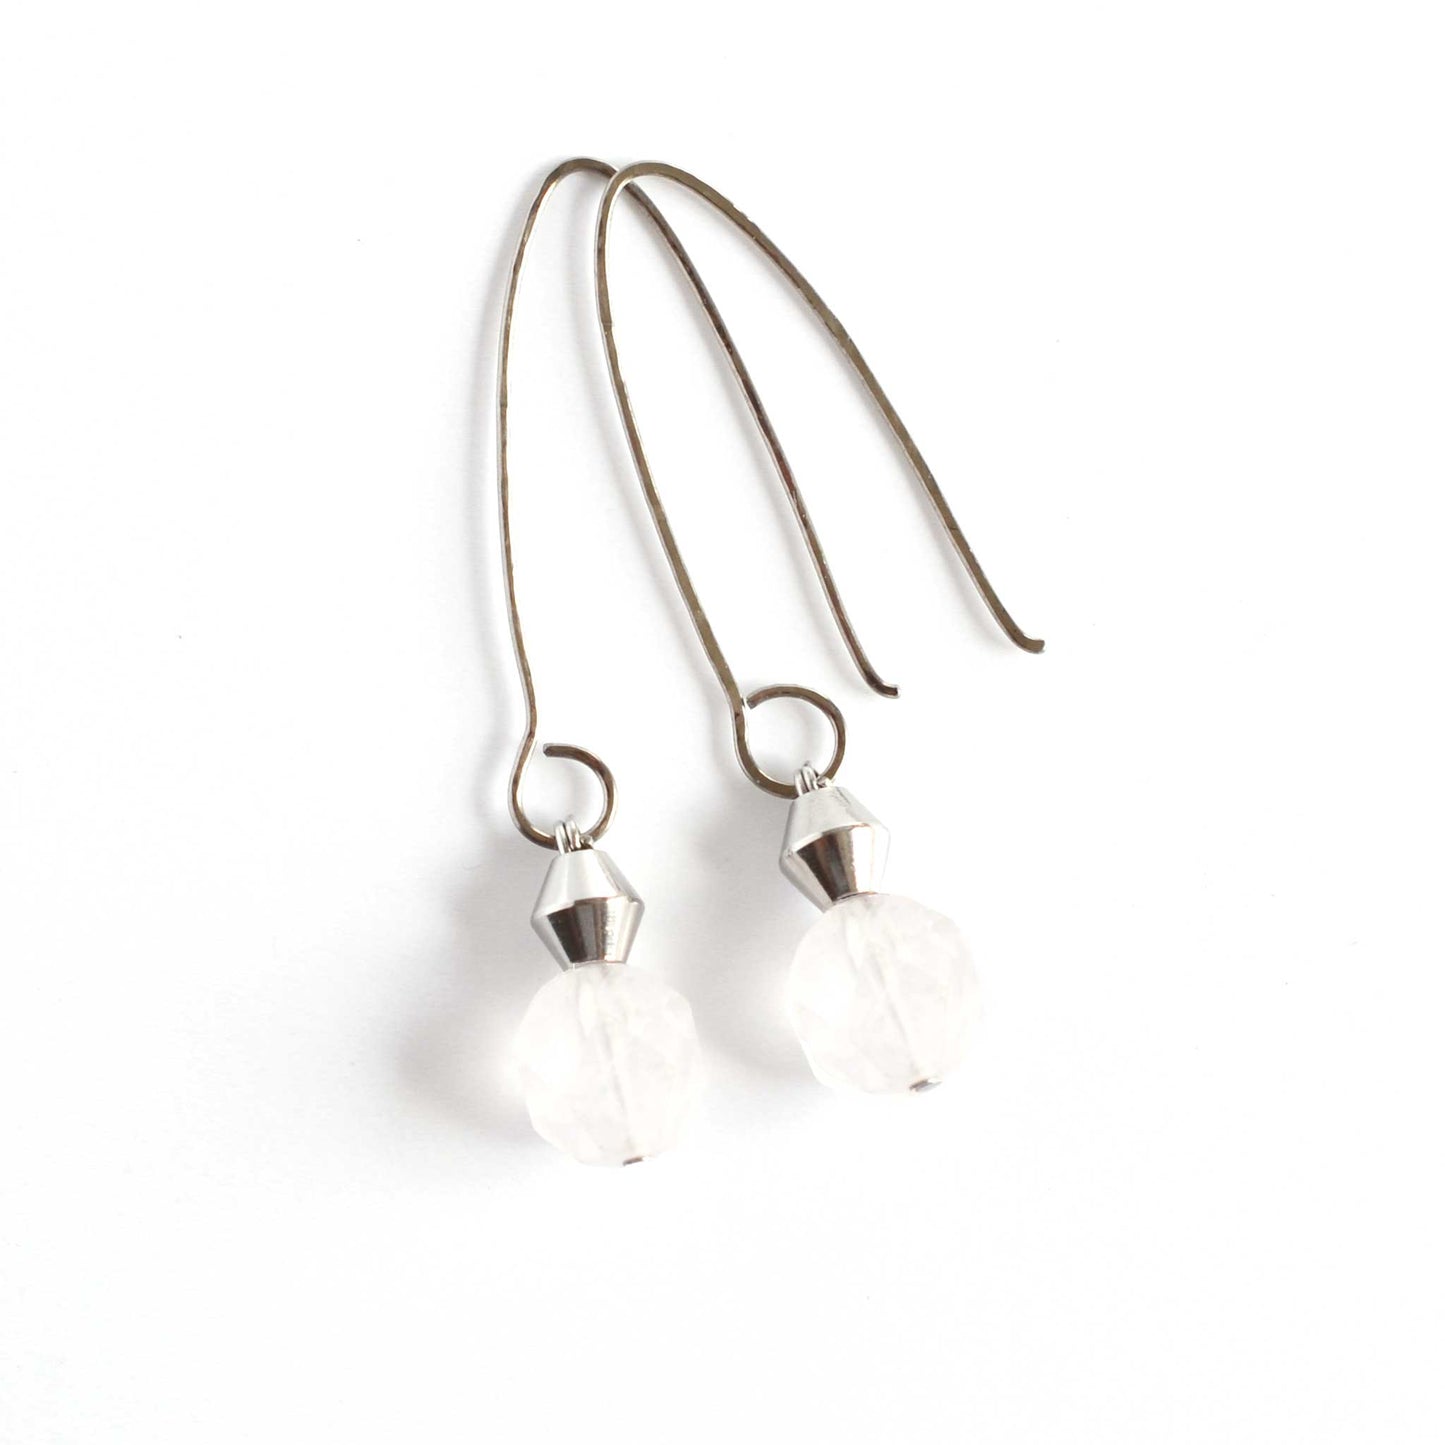 Pale pink Rose Quartz crystal drop earrings with curved hook laying on white background.